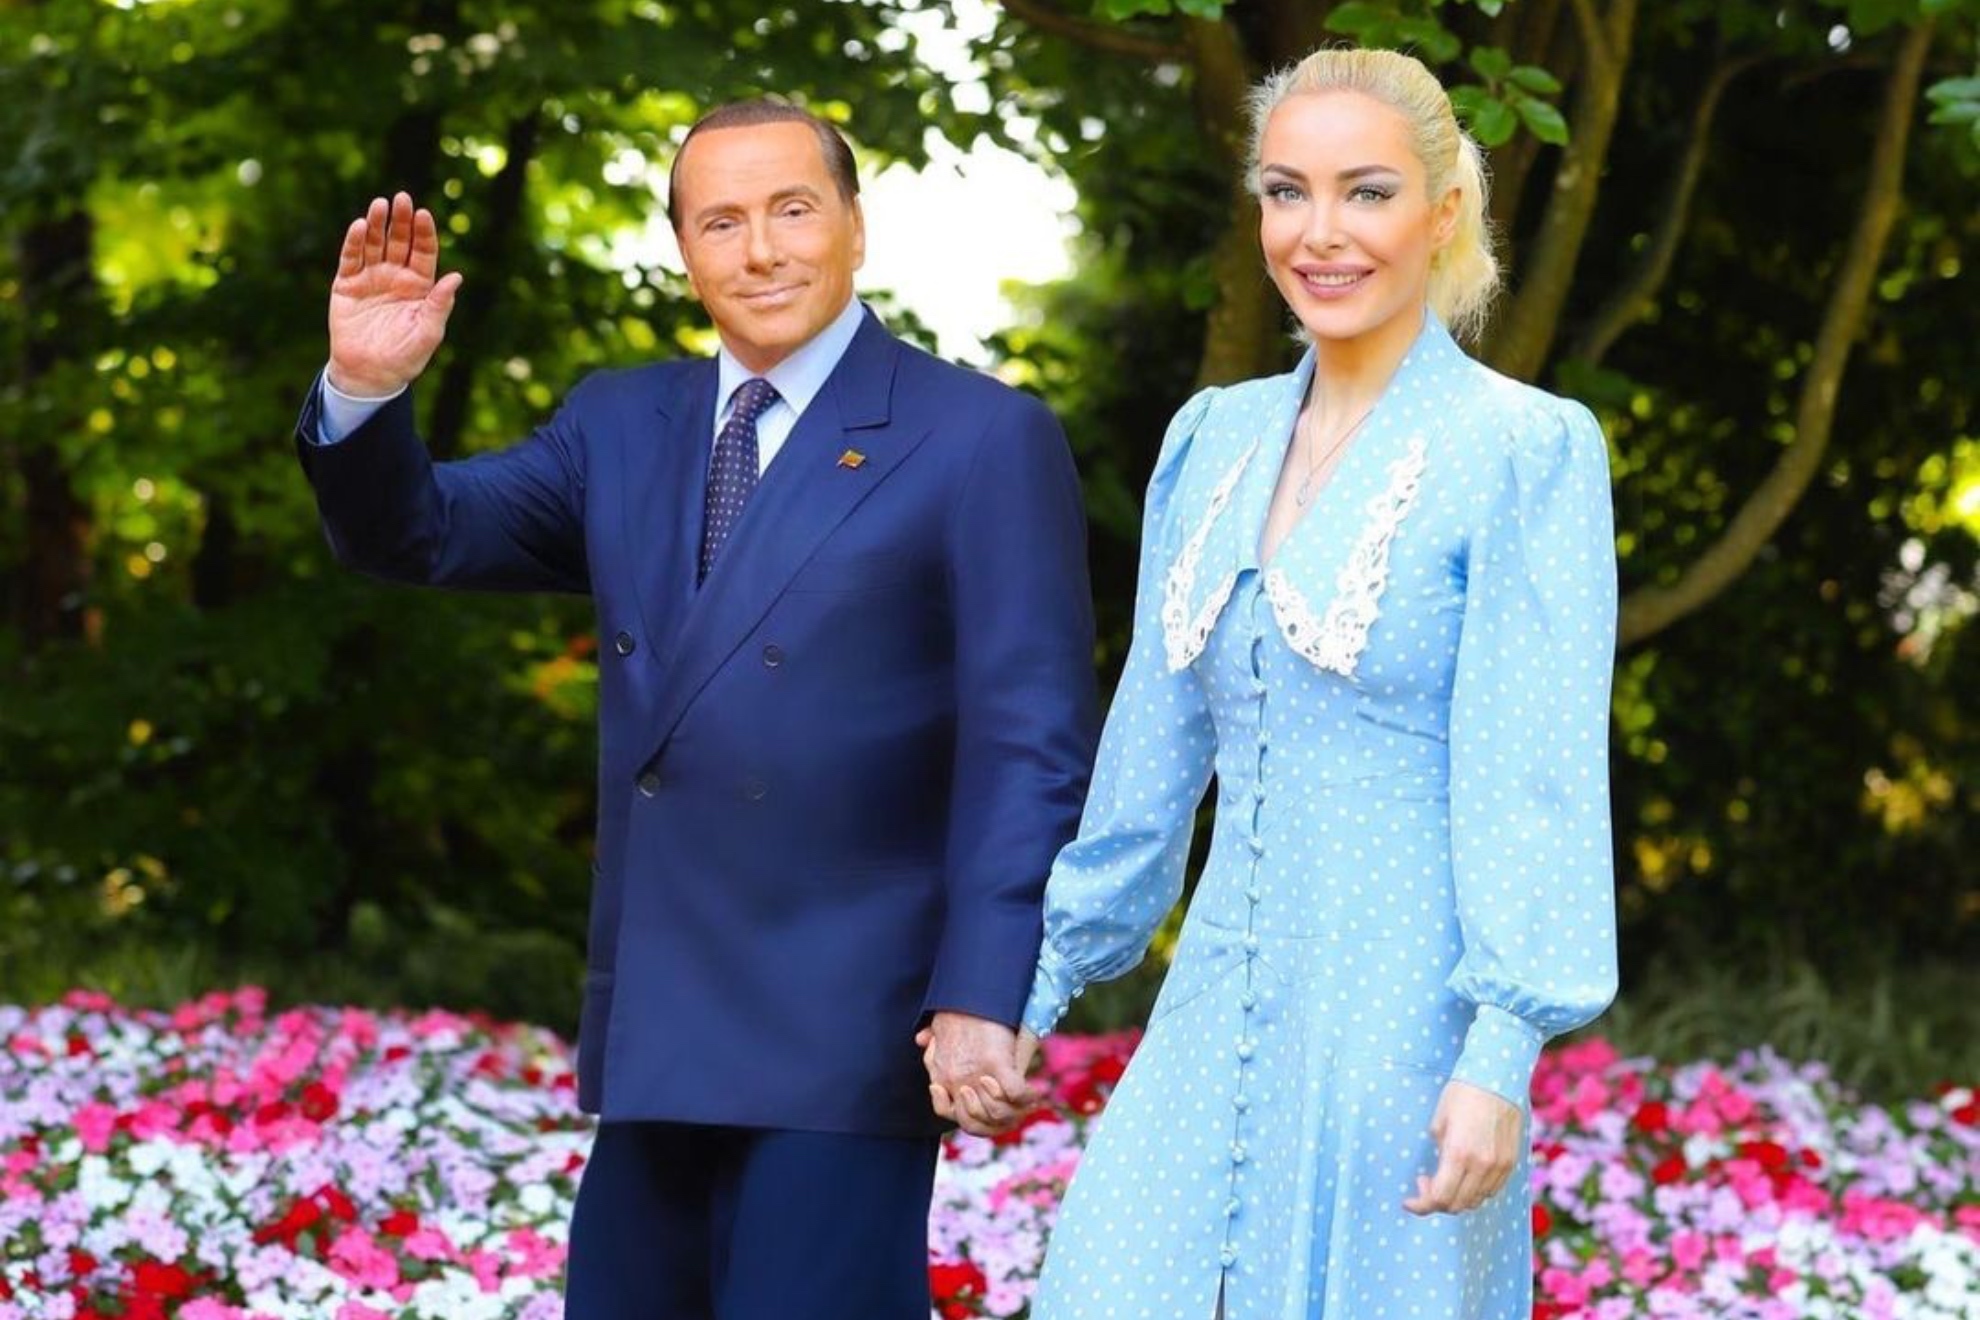 Who is Marta Fascina, the girlfriend of Silvio Berlusconi who is 53 years younger than him?